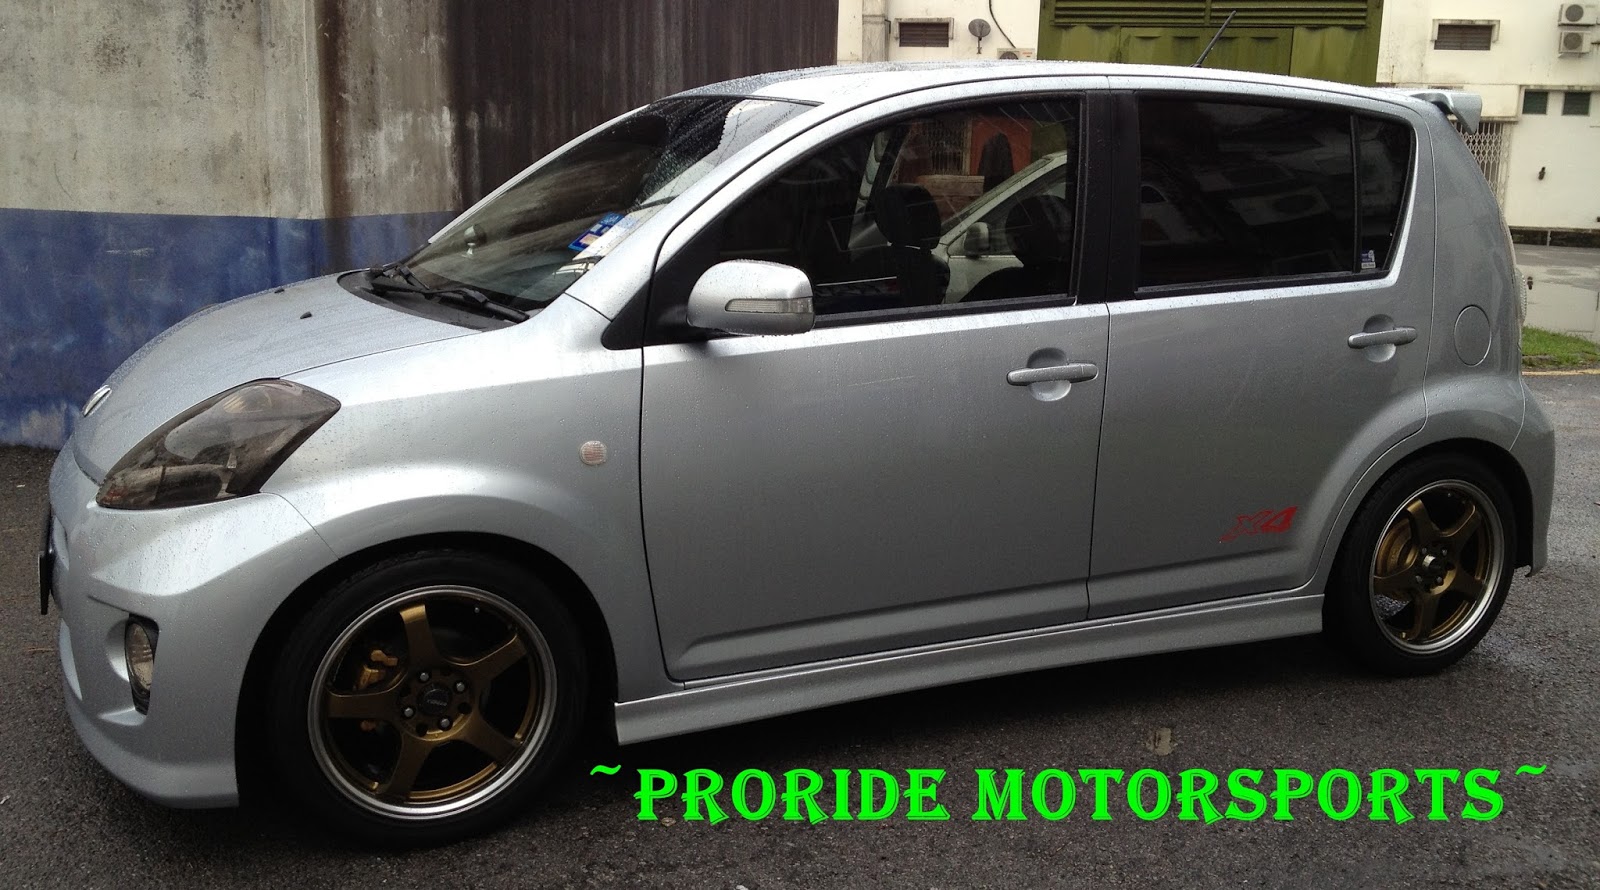 Pro-ride Motorsports: Perodua Myvi installed with KYB RS 